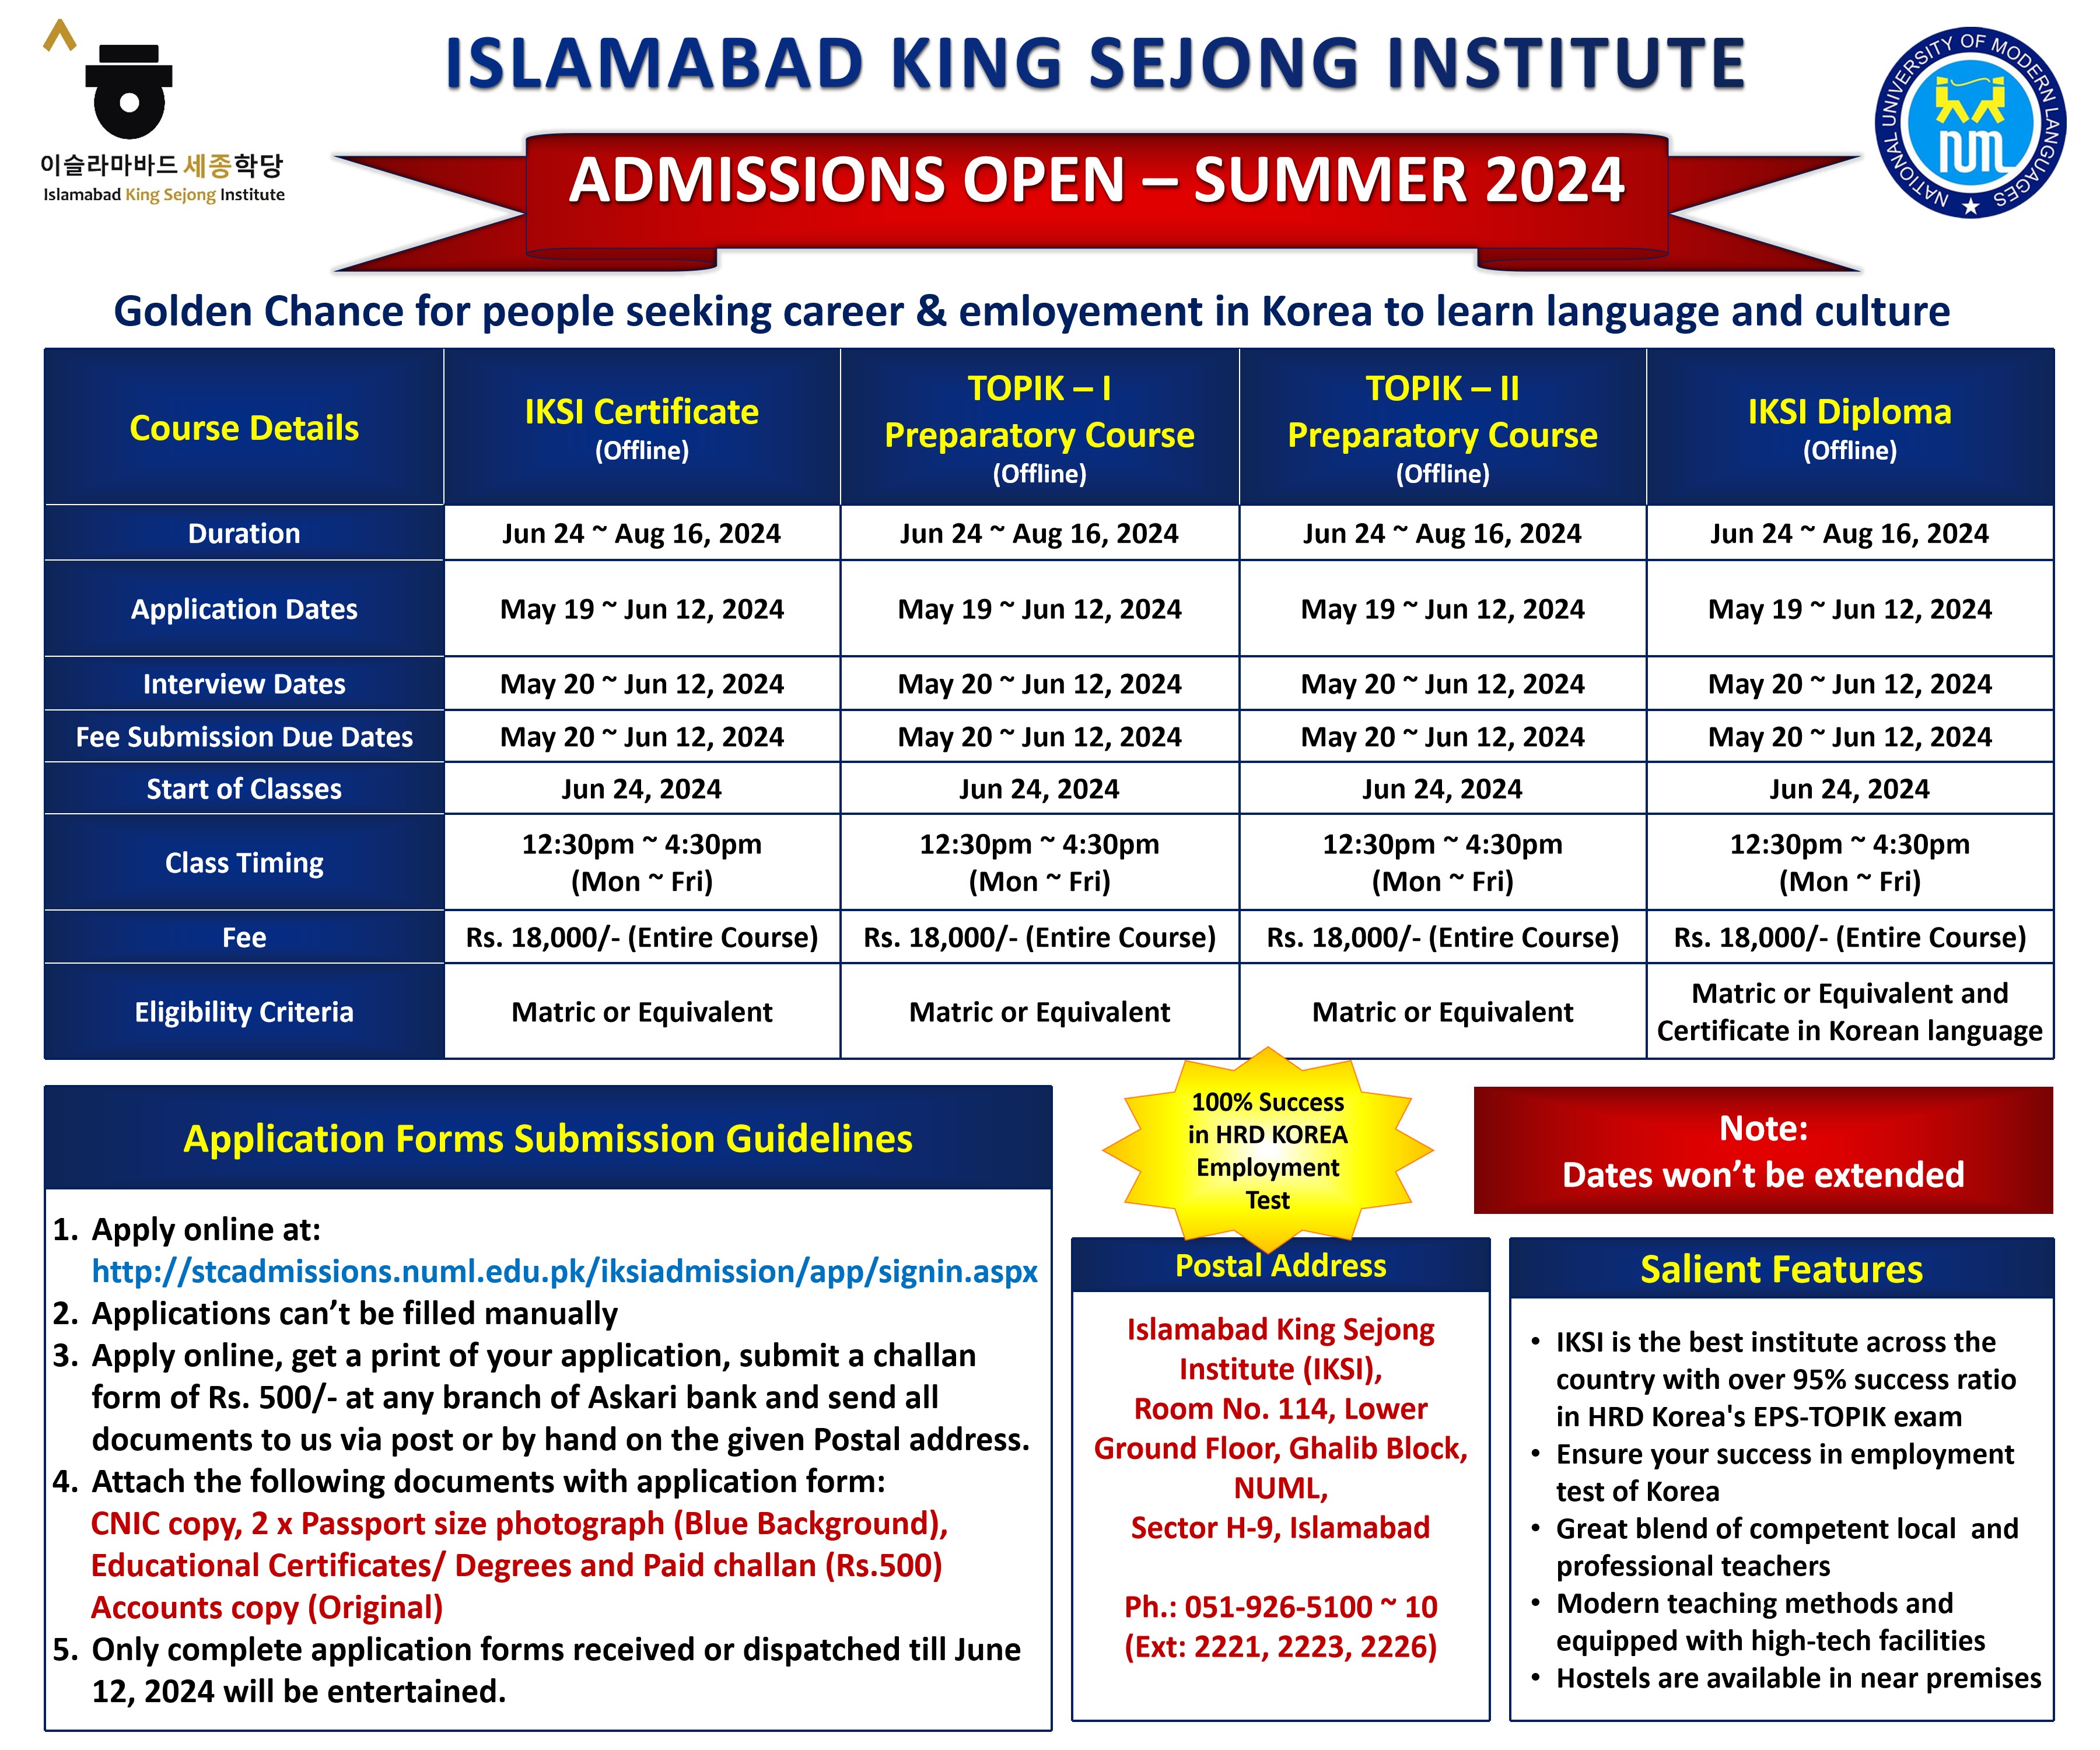 ISLAMABAD KING SEJONG INSTITUTE - ADMISSIONS OPEN SUMMER 2024